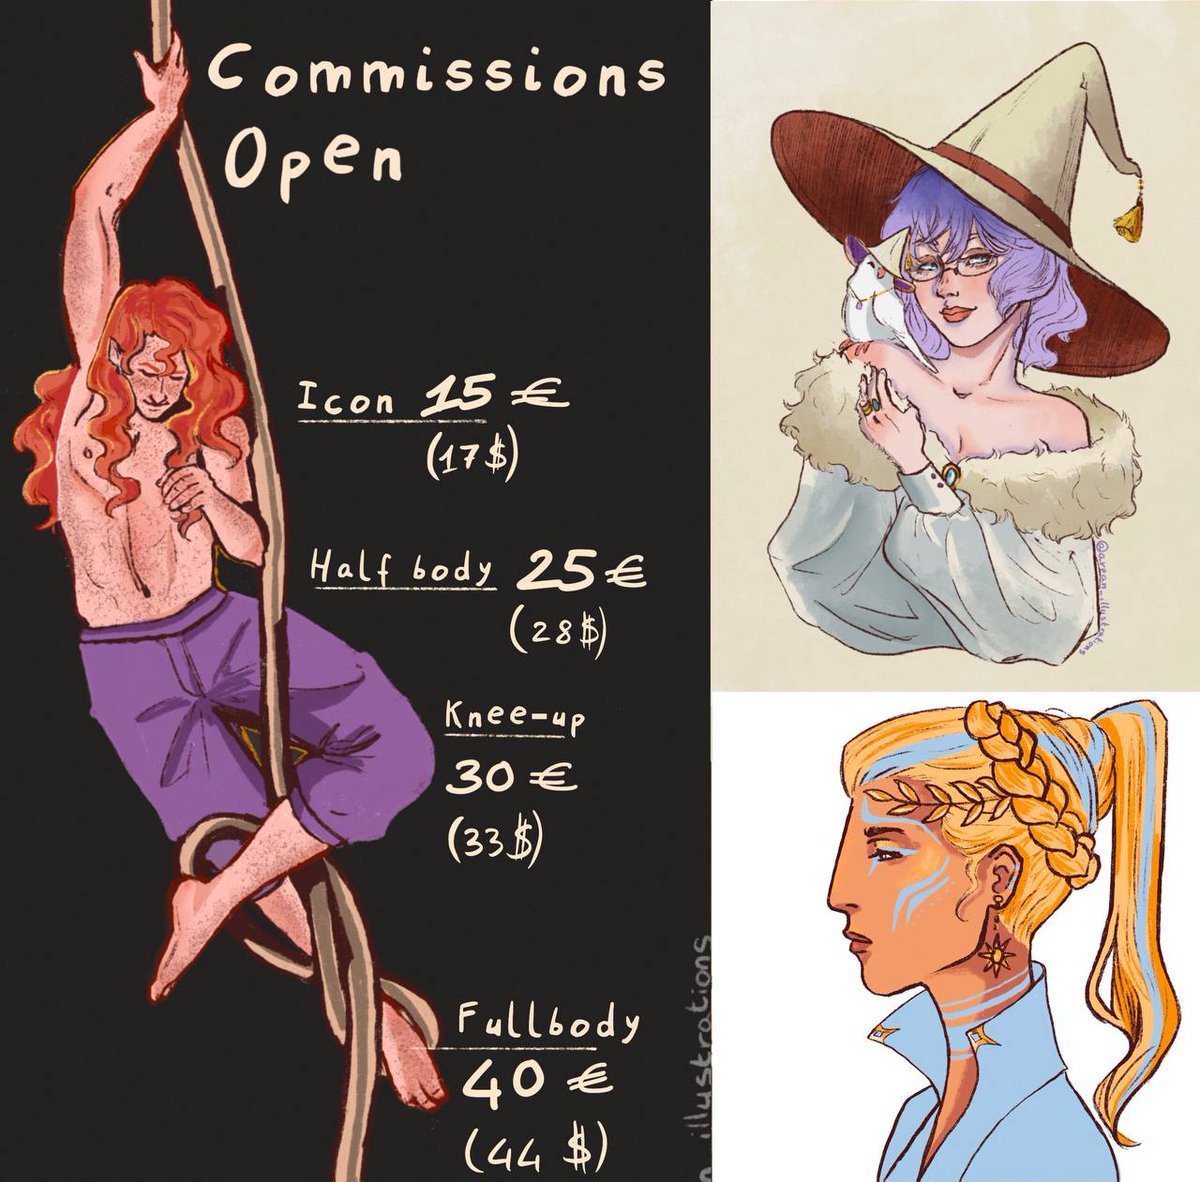 Posting again my commission sheet! 
Icon 15€ 
Half body 25€ 
Knee-up 30€
Fullbody 40€

Paypal payment (half upfront and half after I finished ✨) feel free to DM me ❤️
#commissionsopen #Commission #illustrationcommission #openforcommission #DnDcharacter #Illustration